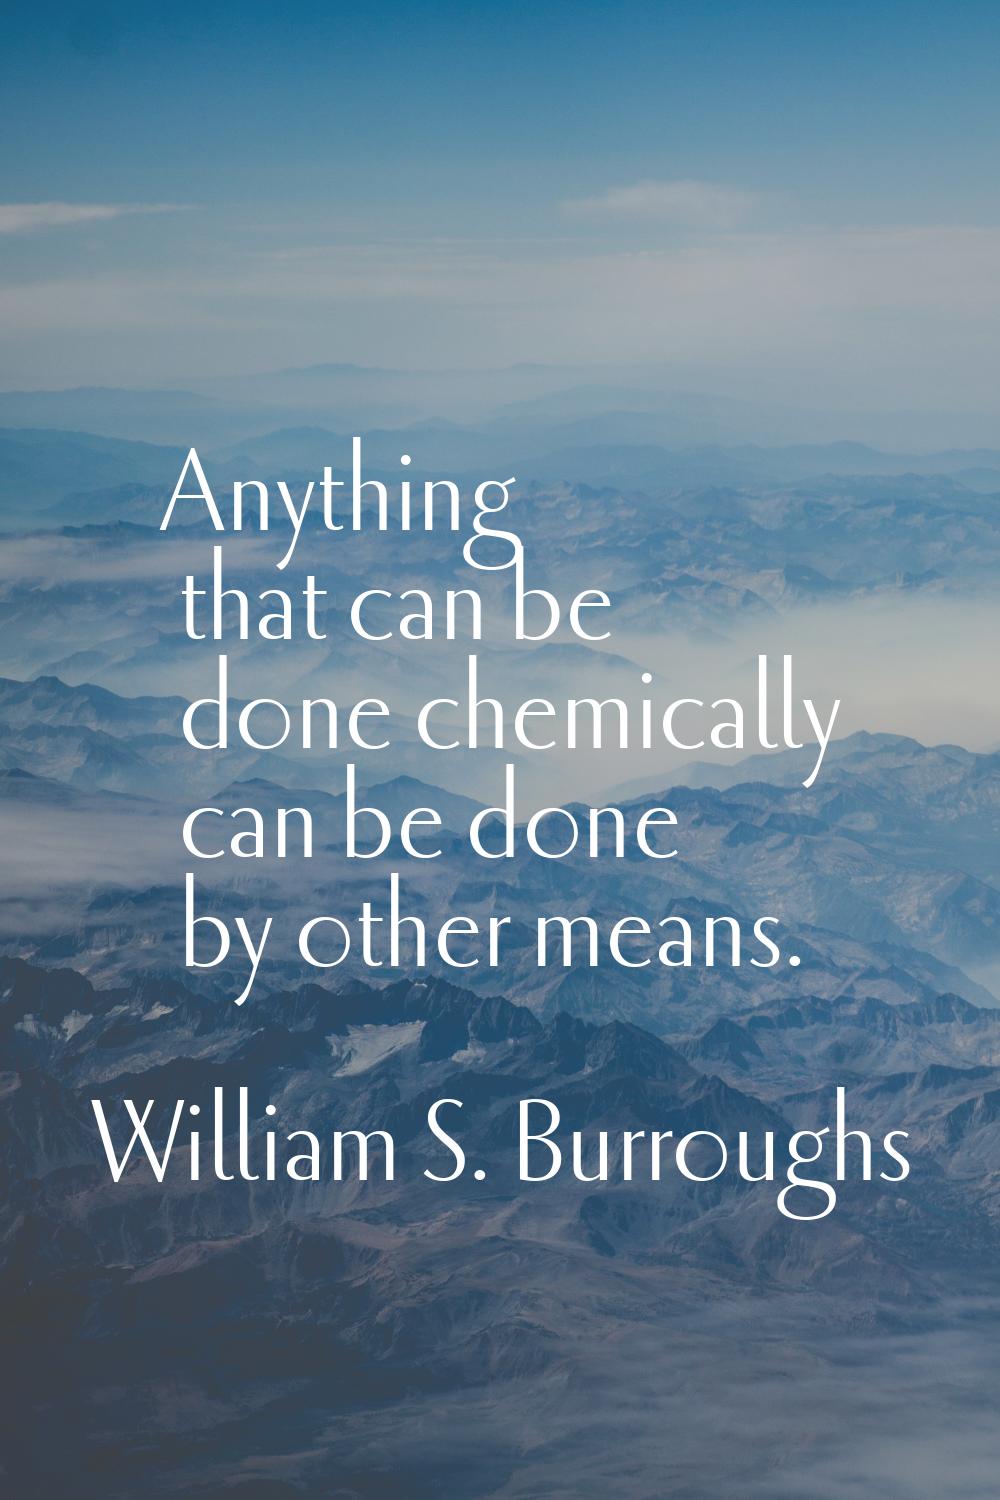 Anything that can be done chemically can be done by other means.